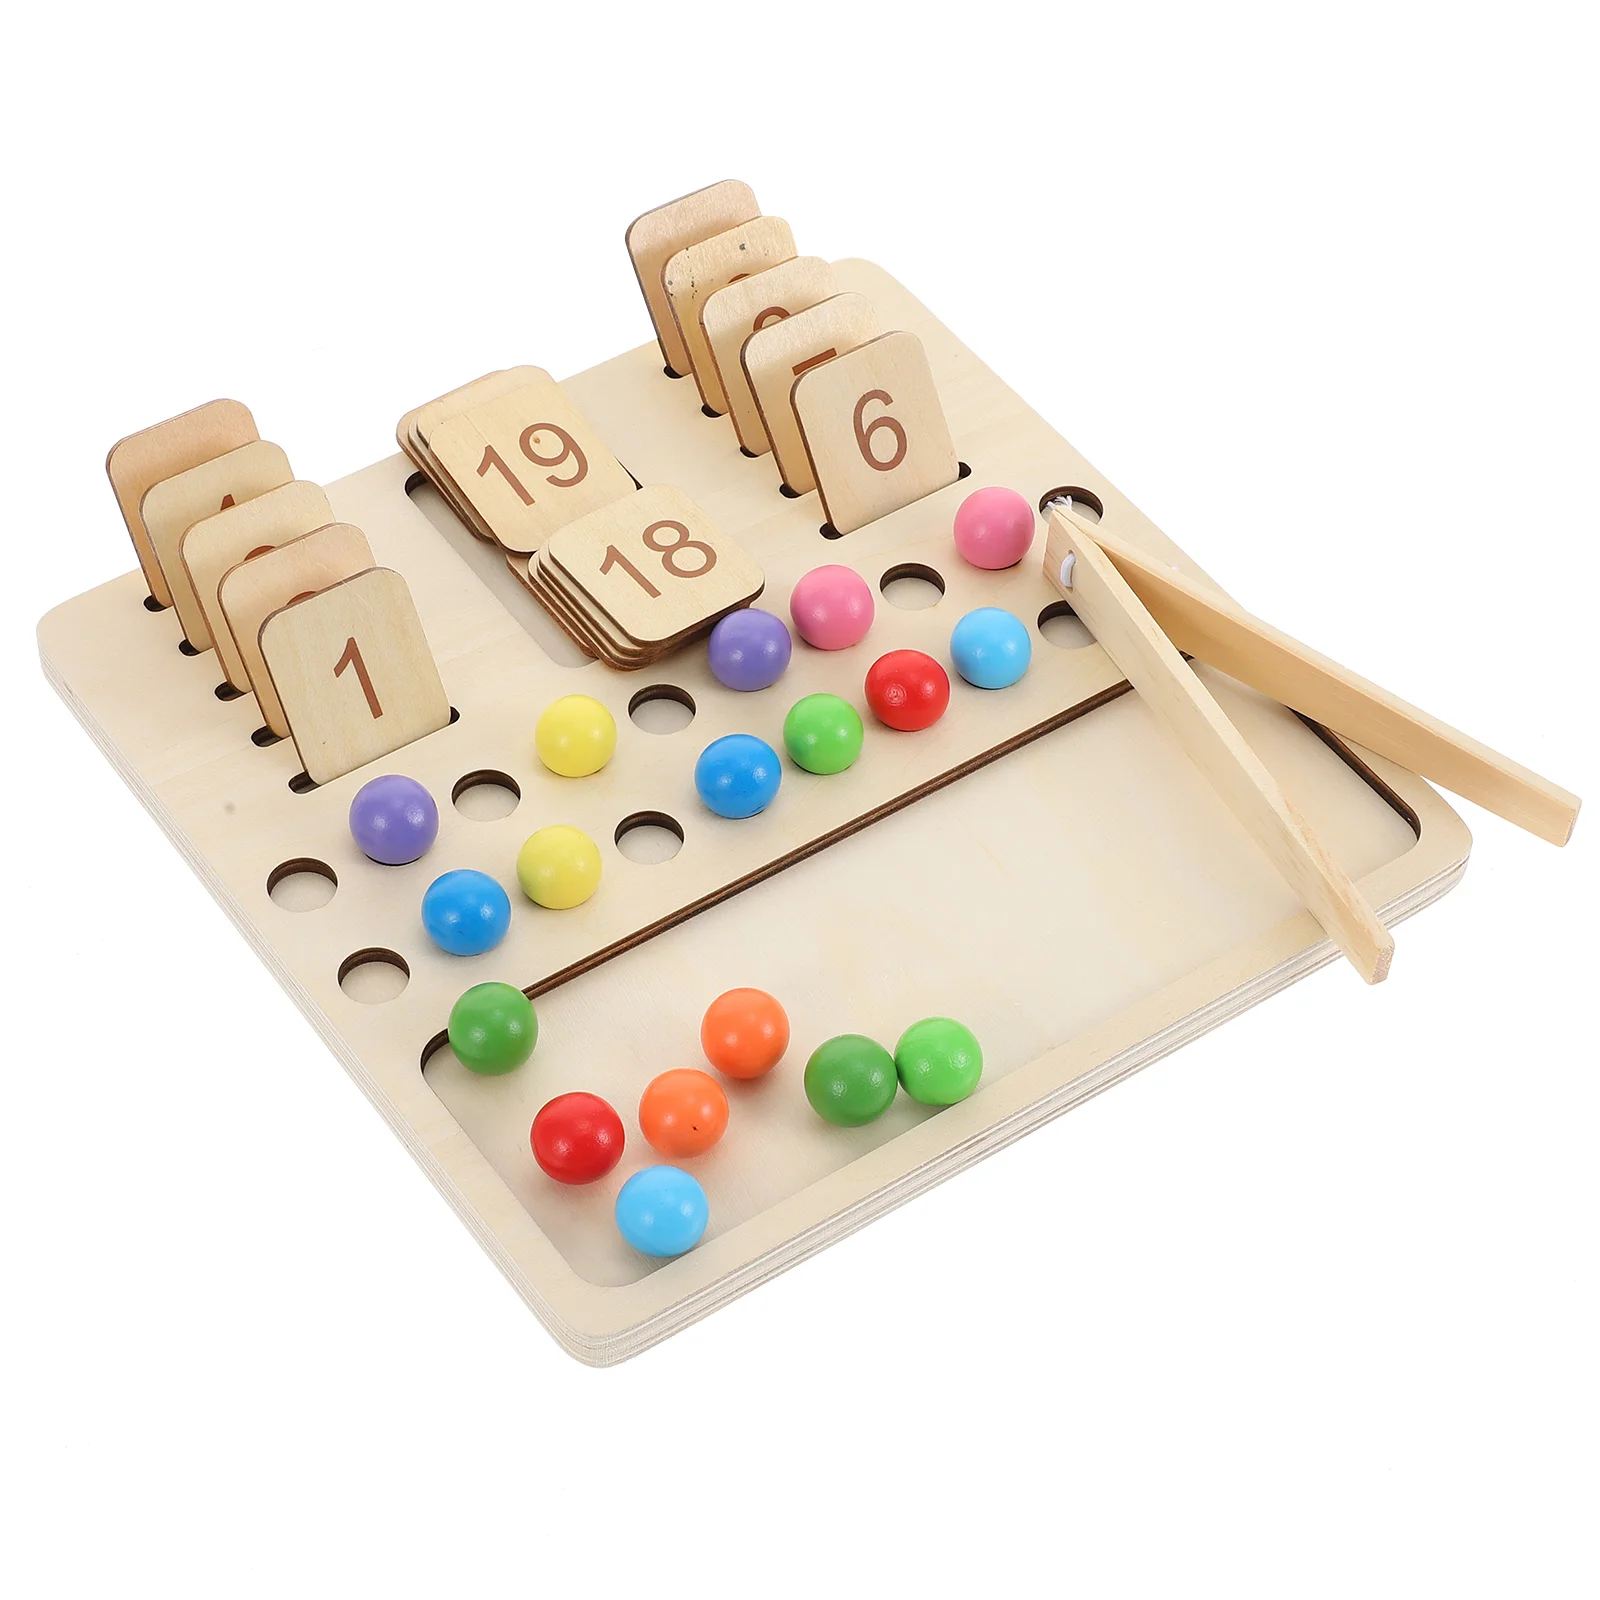 Digital Cognitive Board Toys Wooden Educational Teaching Supplies Playthings Aids Arithmetic Boards Math Learning children toy montessori educational wooden toys kids 99 multiplication table math arithmetic children baby toys teaching aids